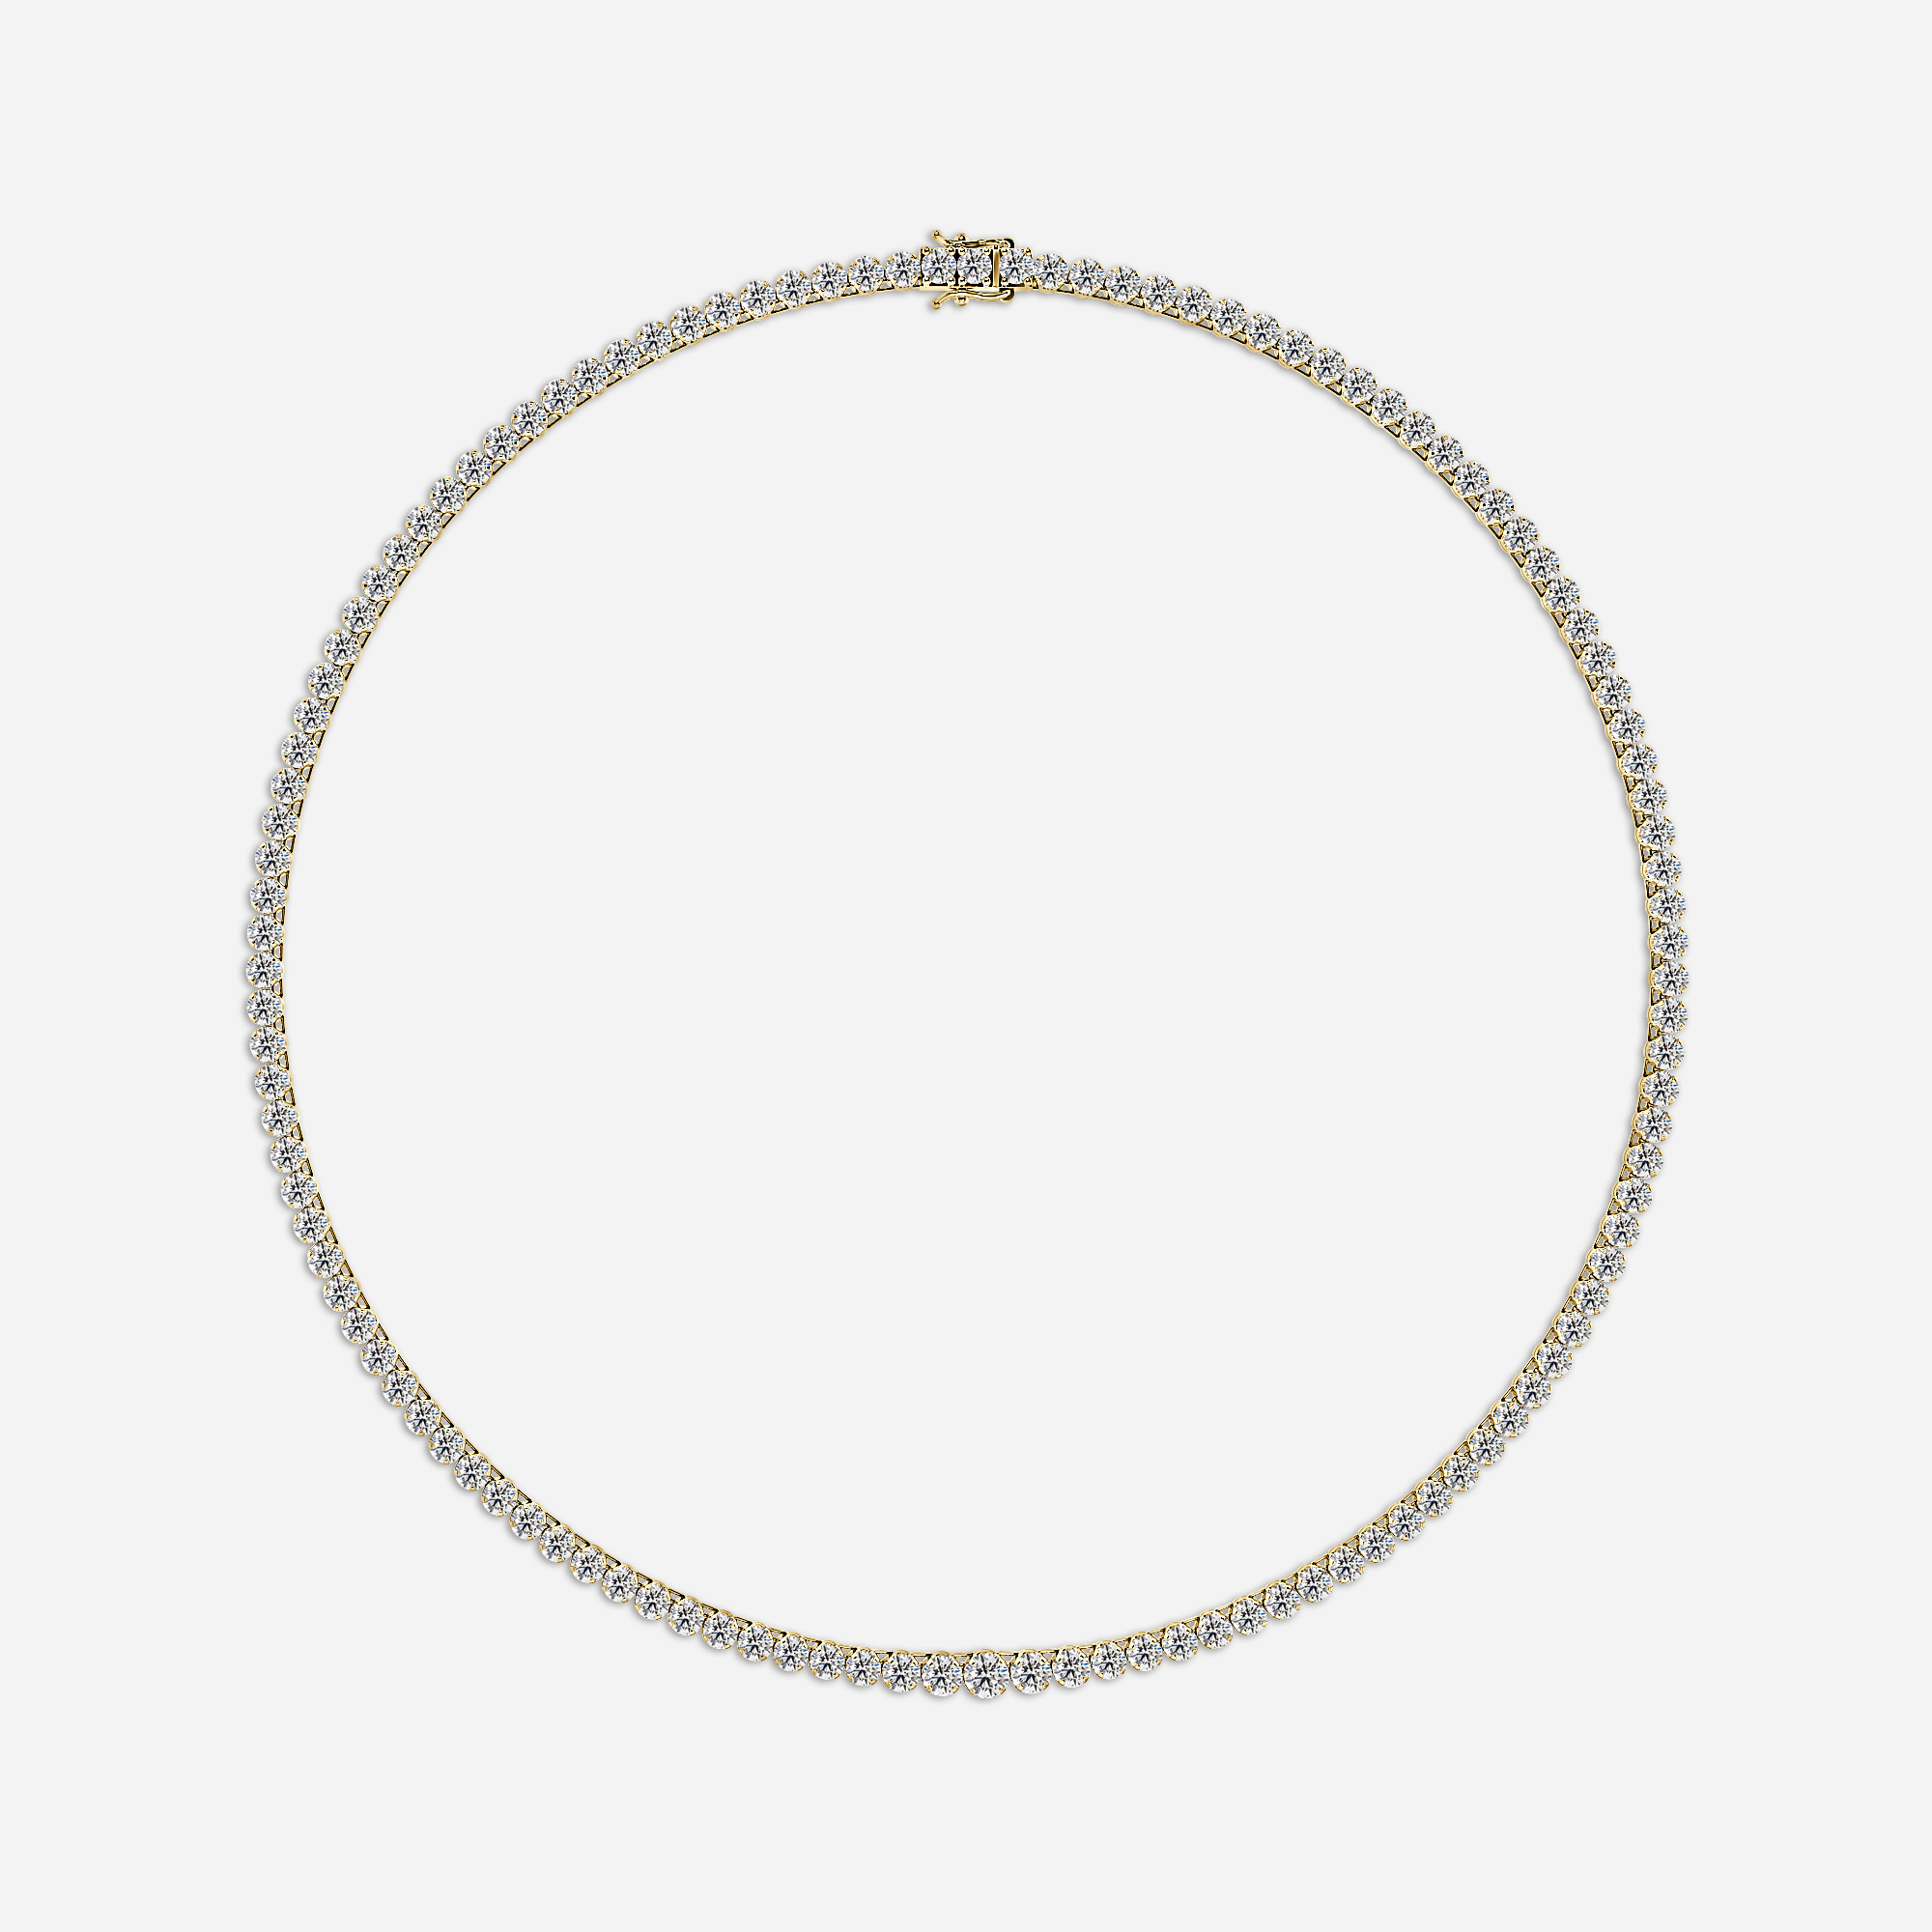 19.59 Ct Graduated Diamond Tennis Necklaces In Yellow Gold